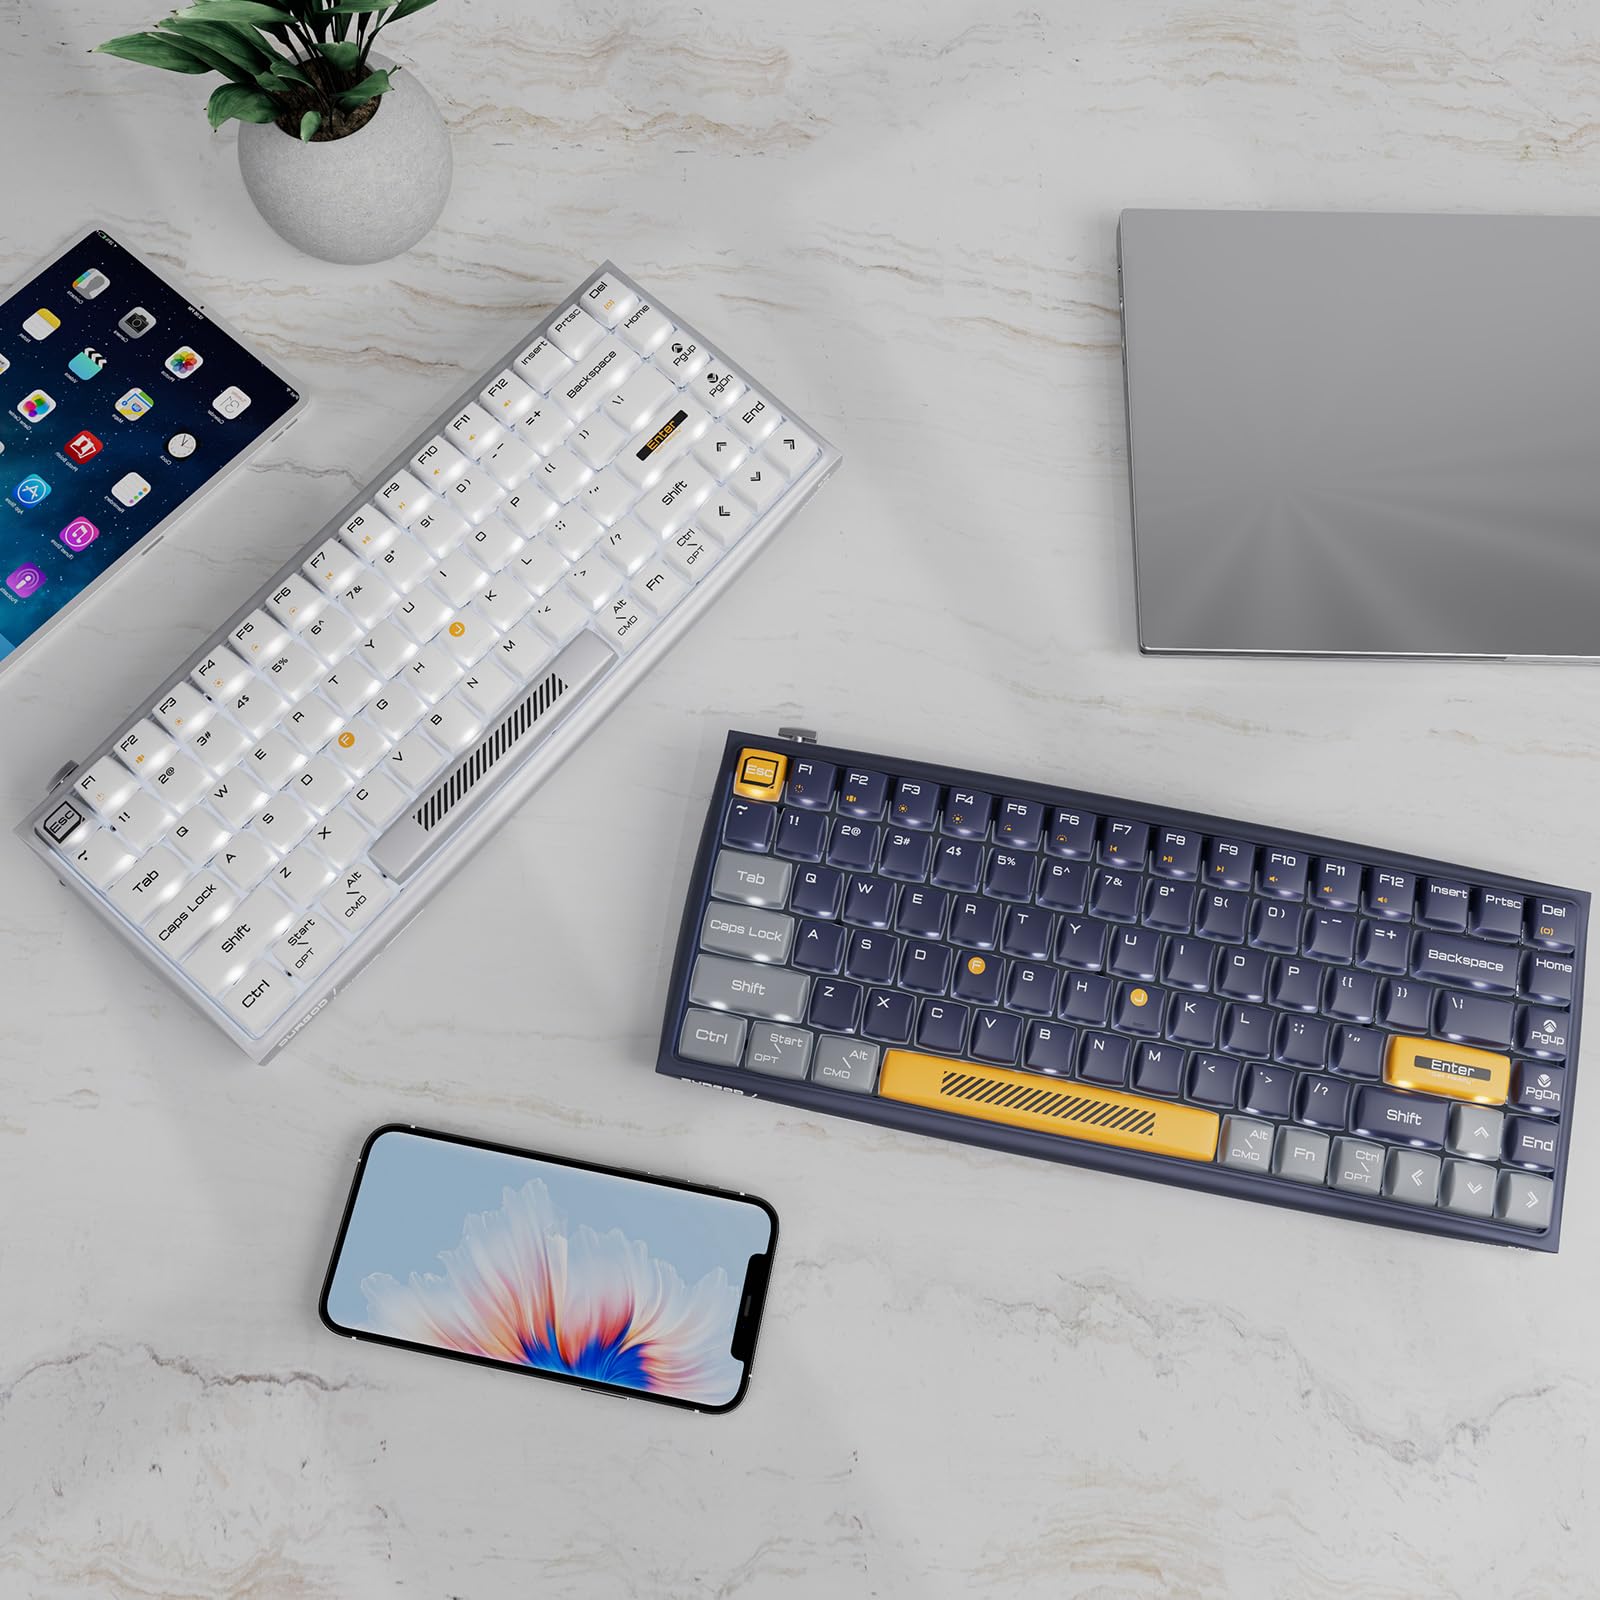 Durgod K710 Wireless Mechanical Keyboard, 84-Key 75% Layout, Connect up to 3 Devices via Bluetooth/2.4G Wireless for Mac Windows Linux, LED Backlit & N-Key Rollover, Tactile Brown Switch, Navy Blue